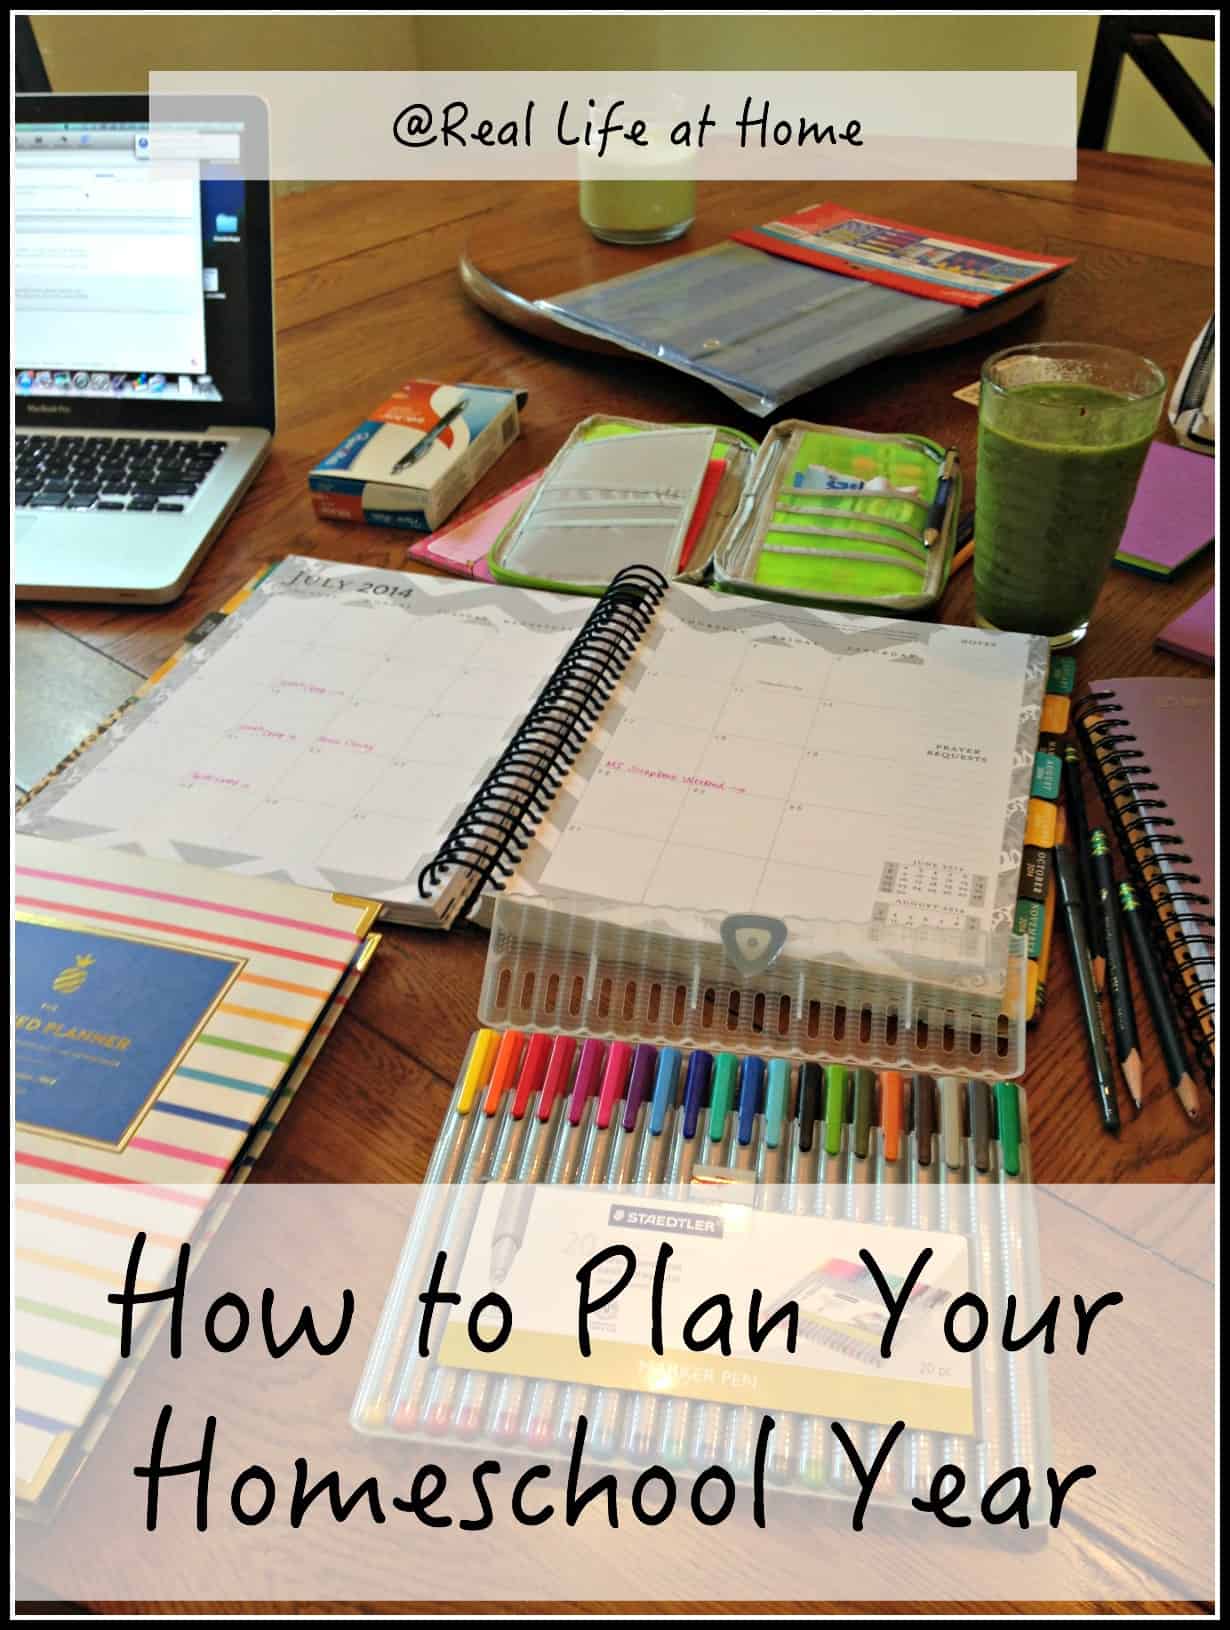 How to Plan Your Homeschool Year